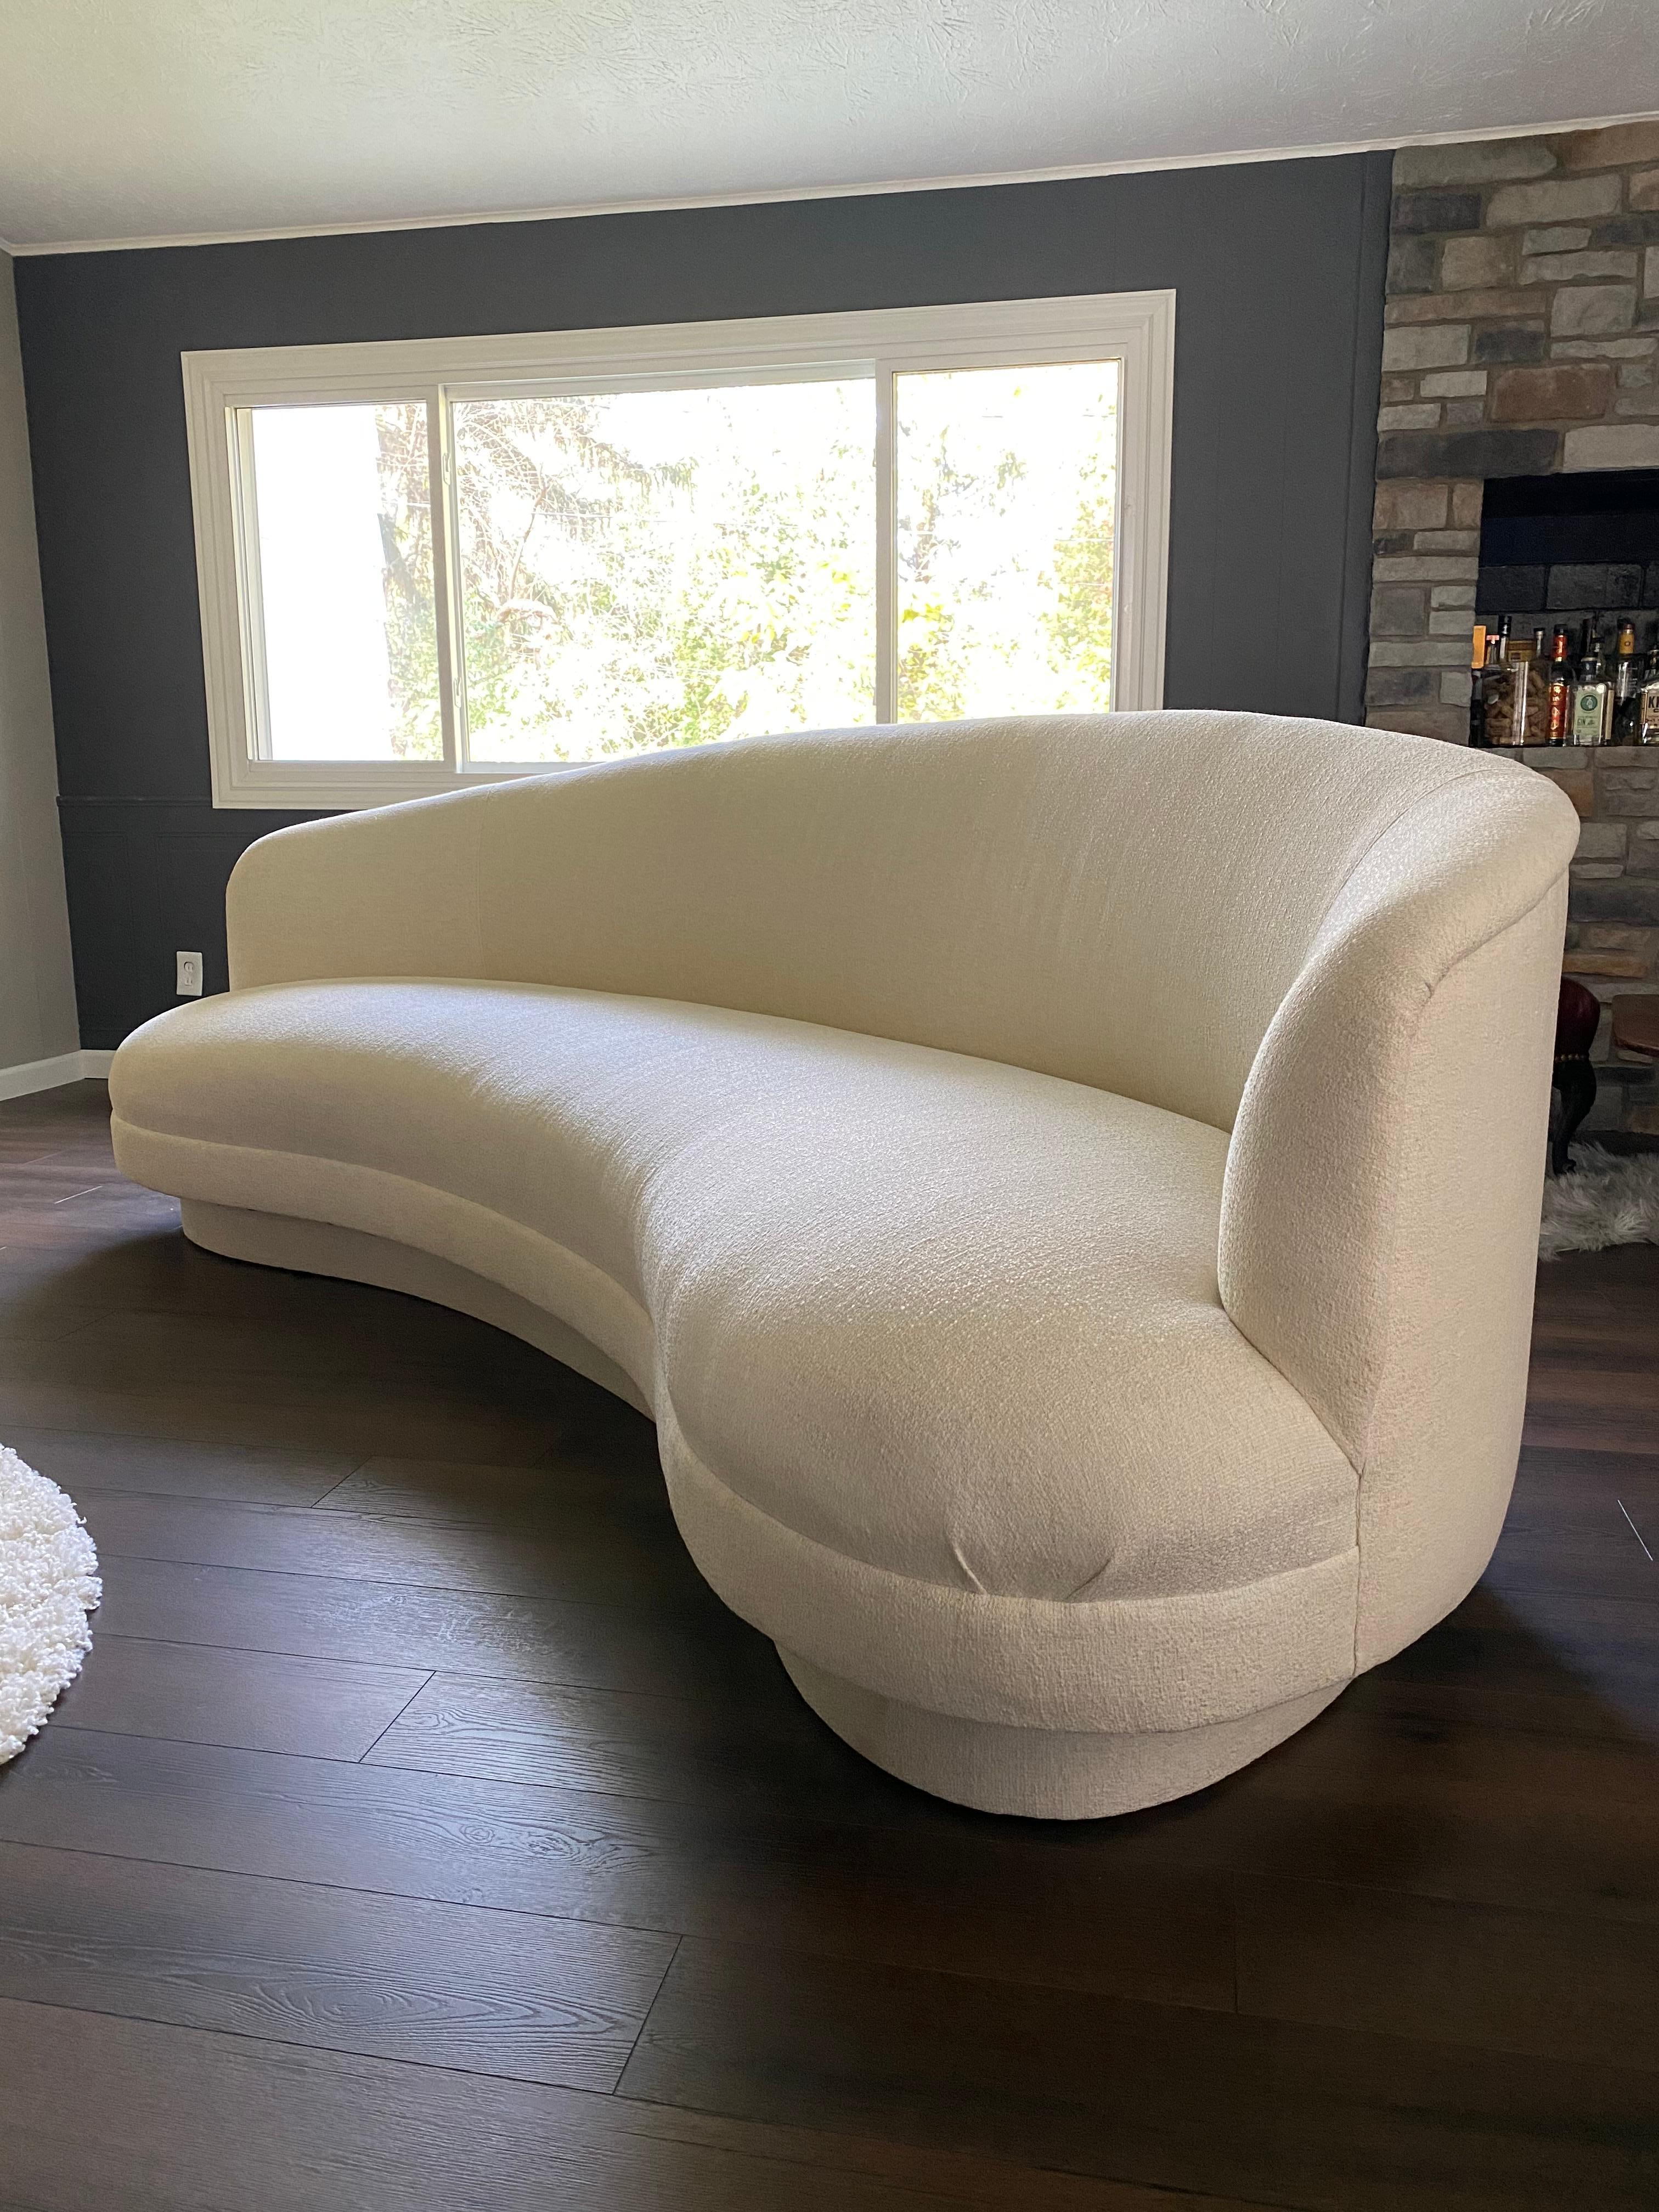 Beautifully reupholstered postmodern cloud sofa. This sofa is reupholstered using Crypton finished off-white boucle fabric, which offers a stain-resistant finish. All new foam and cotton batting as well. This sofa is perfect as a statement piece in